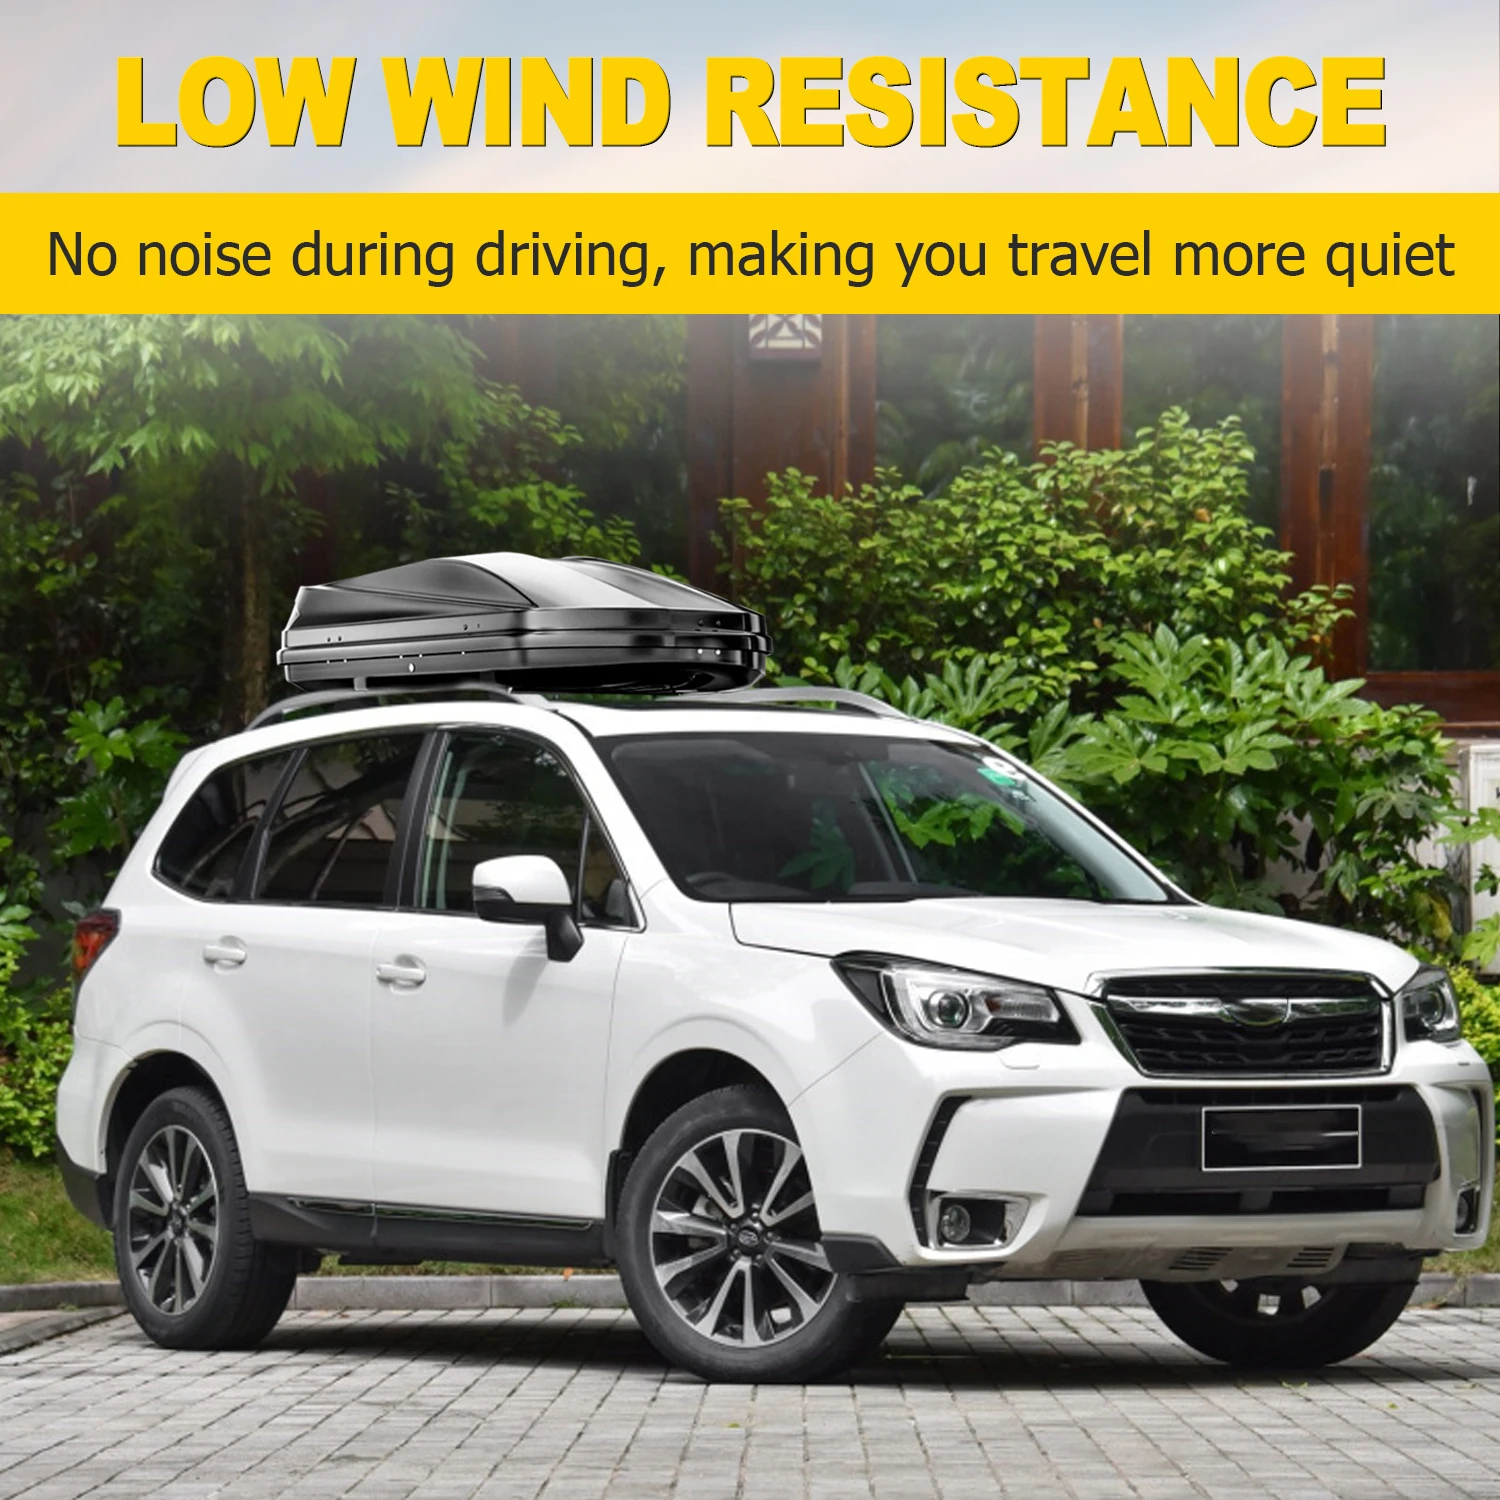 Car Roof Rack for Subaru Forester 2014-2017 ABS SUV Luggage